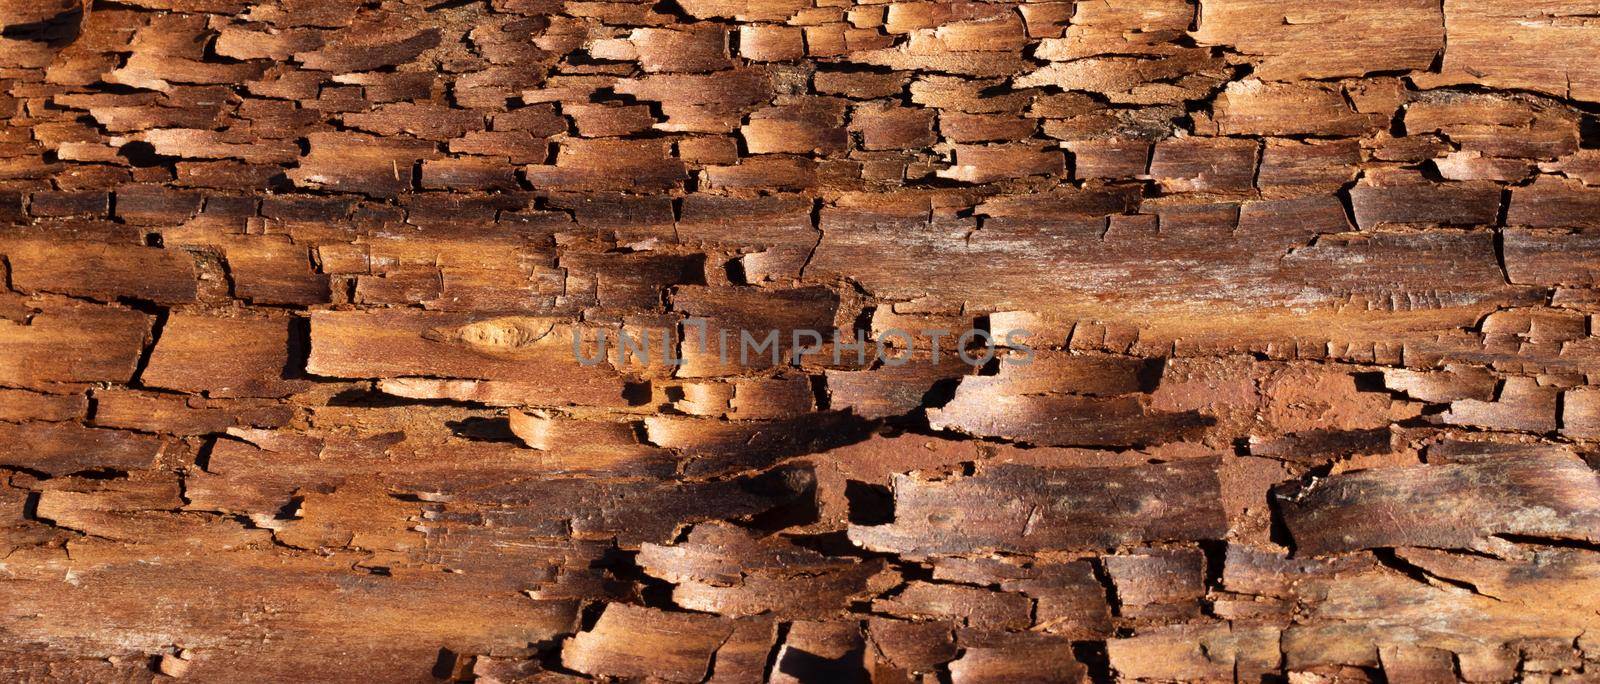 The bark pattern is a seamless wood texture. For background woodwork, brown hardwood bark. place for text